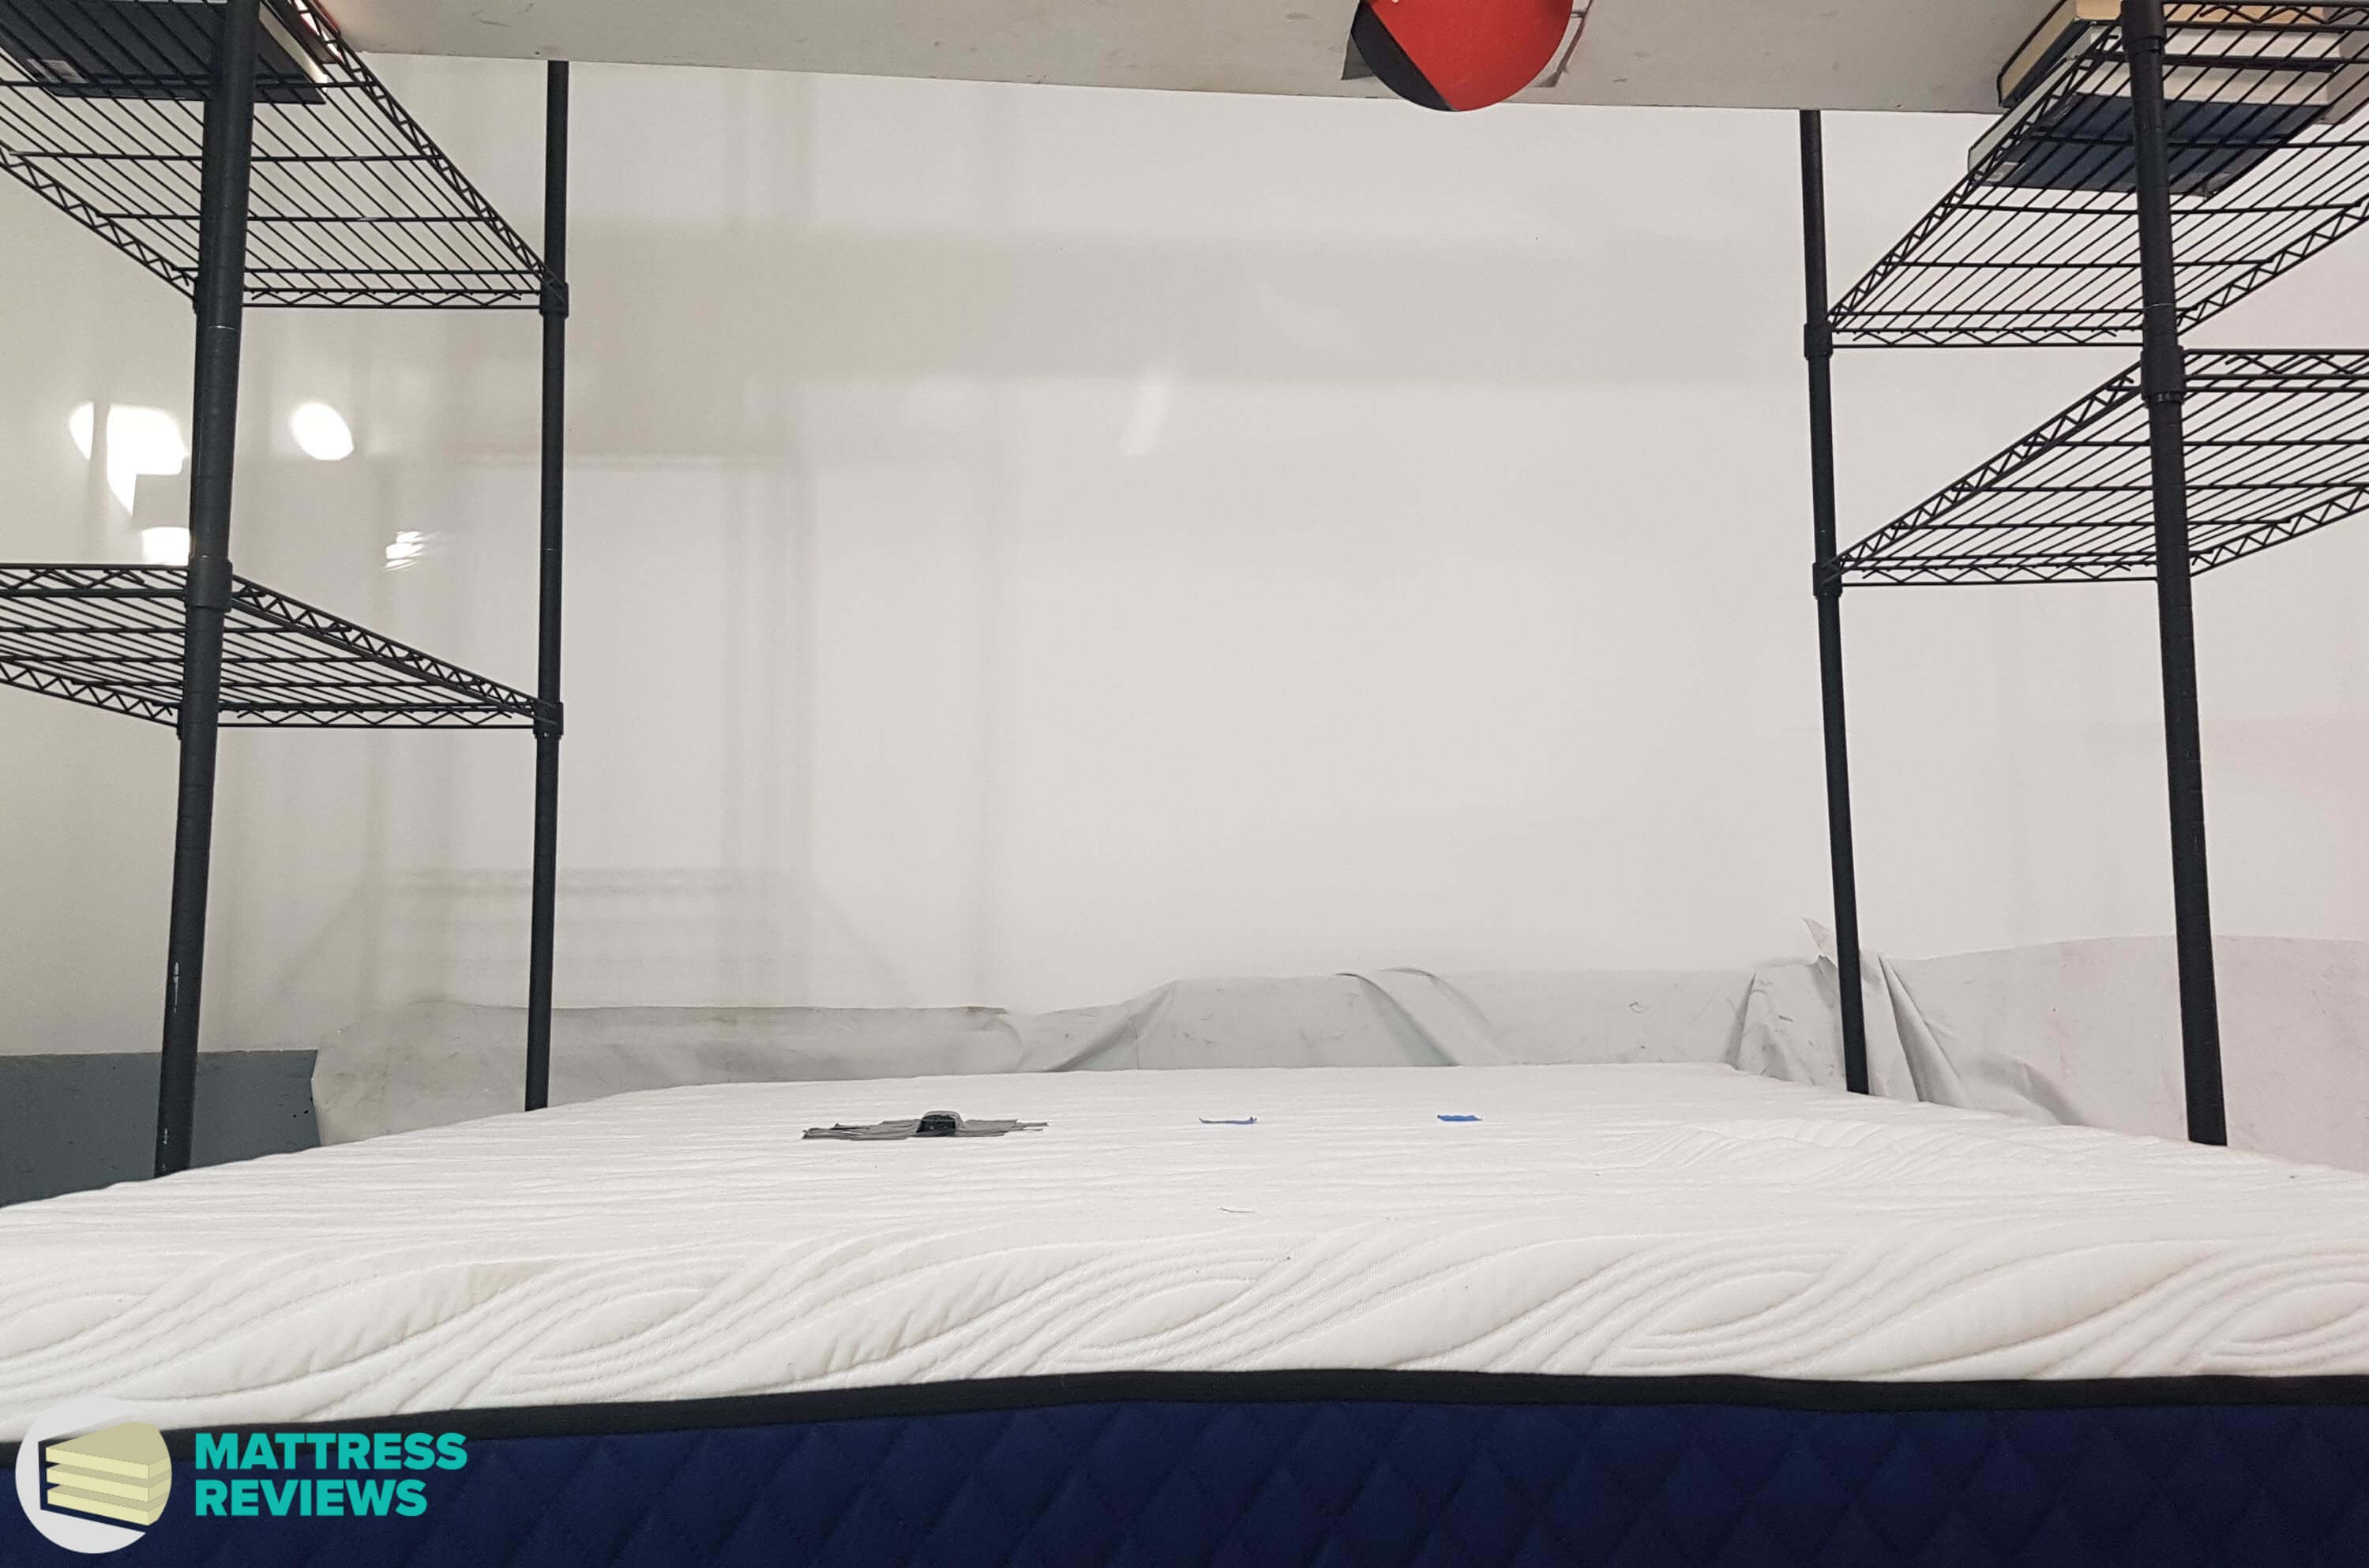 Image of the Silk and Snow mattress motion isolation test.